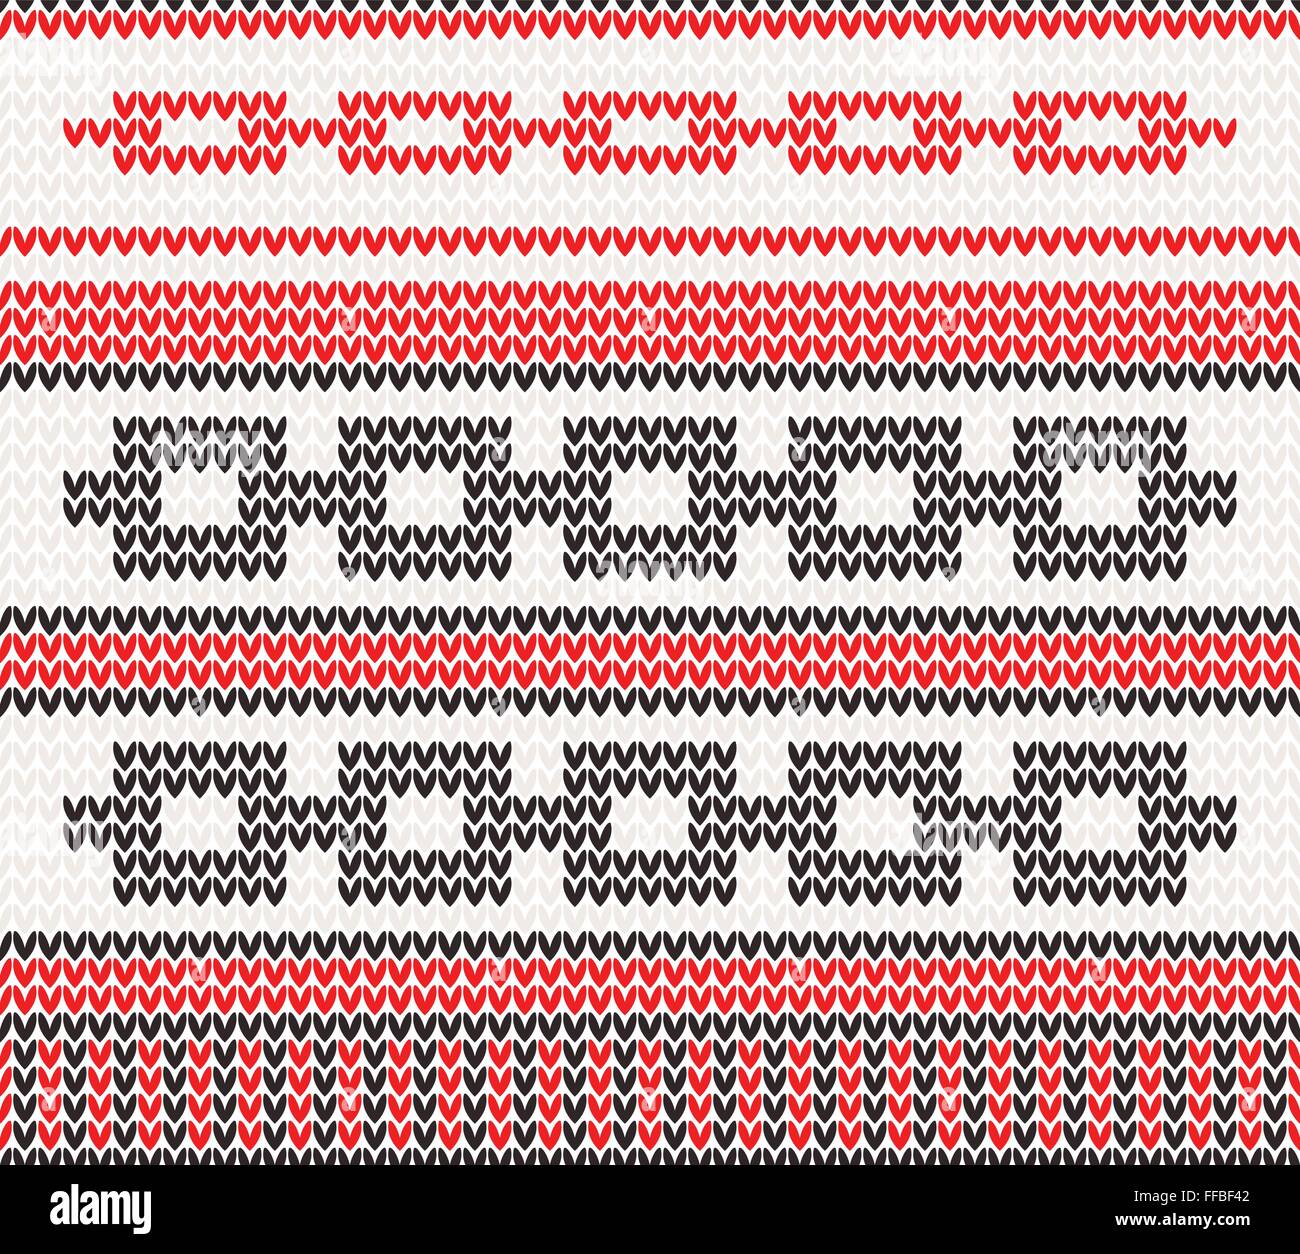 Knitted Seamless Fabric Pattern in red and black color Stock Vector